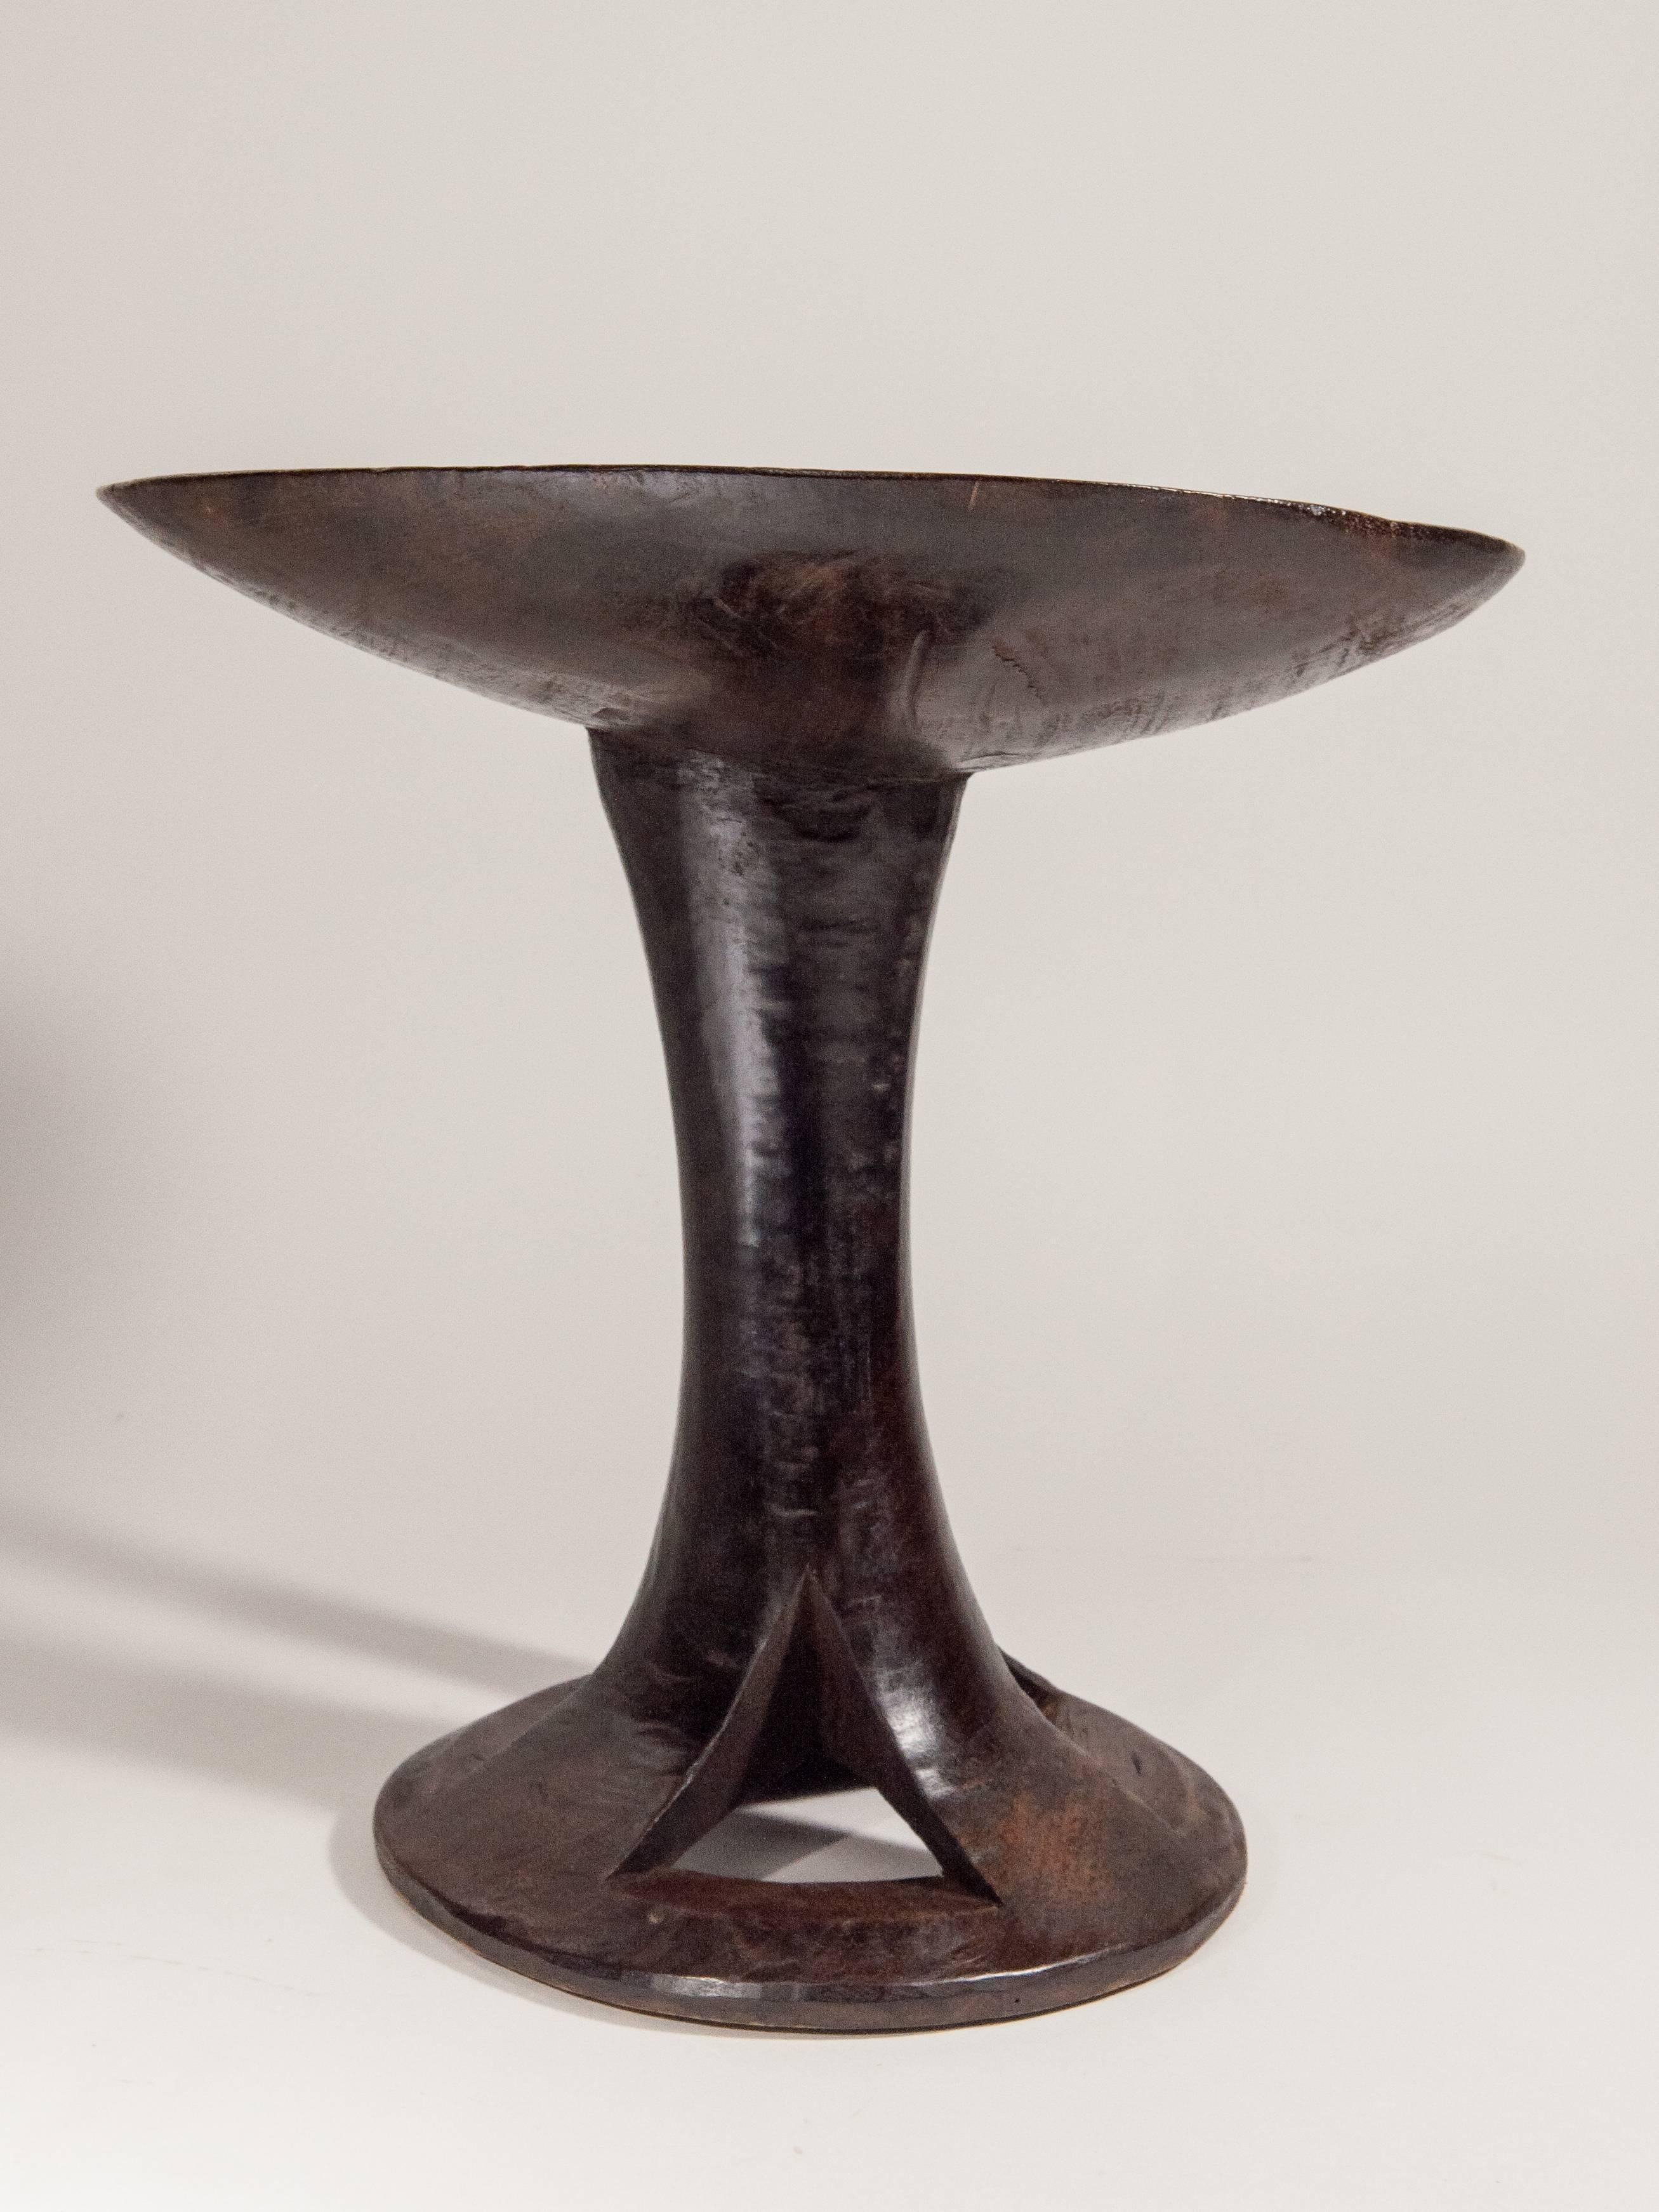 Hand-Crafted Tribal Wooden Food Tray on Stand with Handle, Nagaland, Mid-Late 20th Century